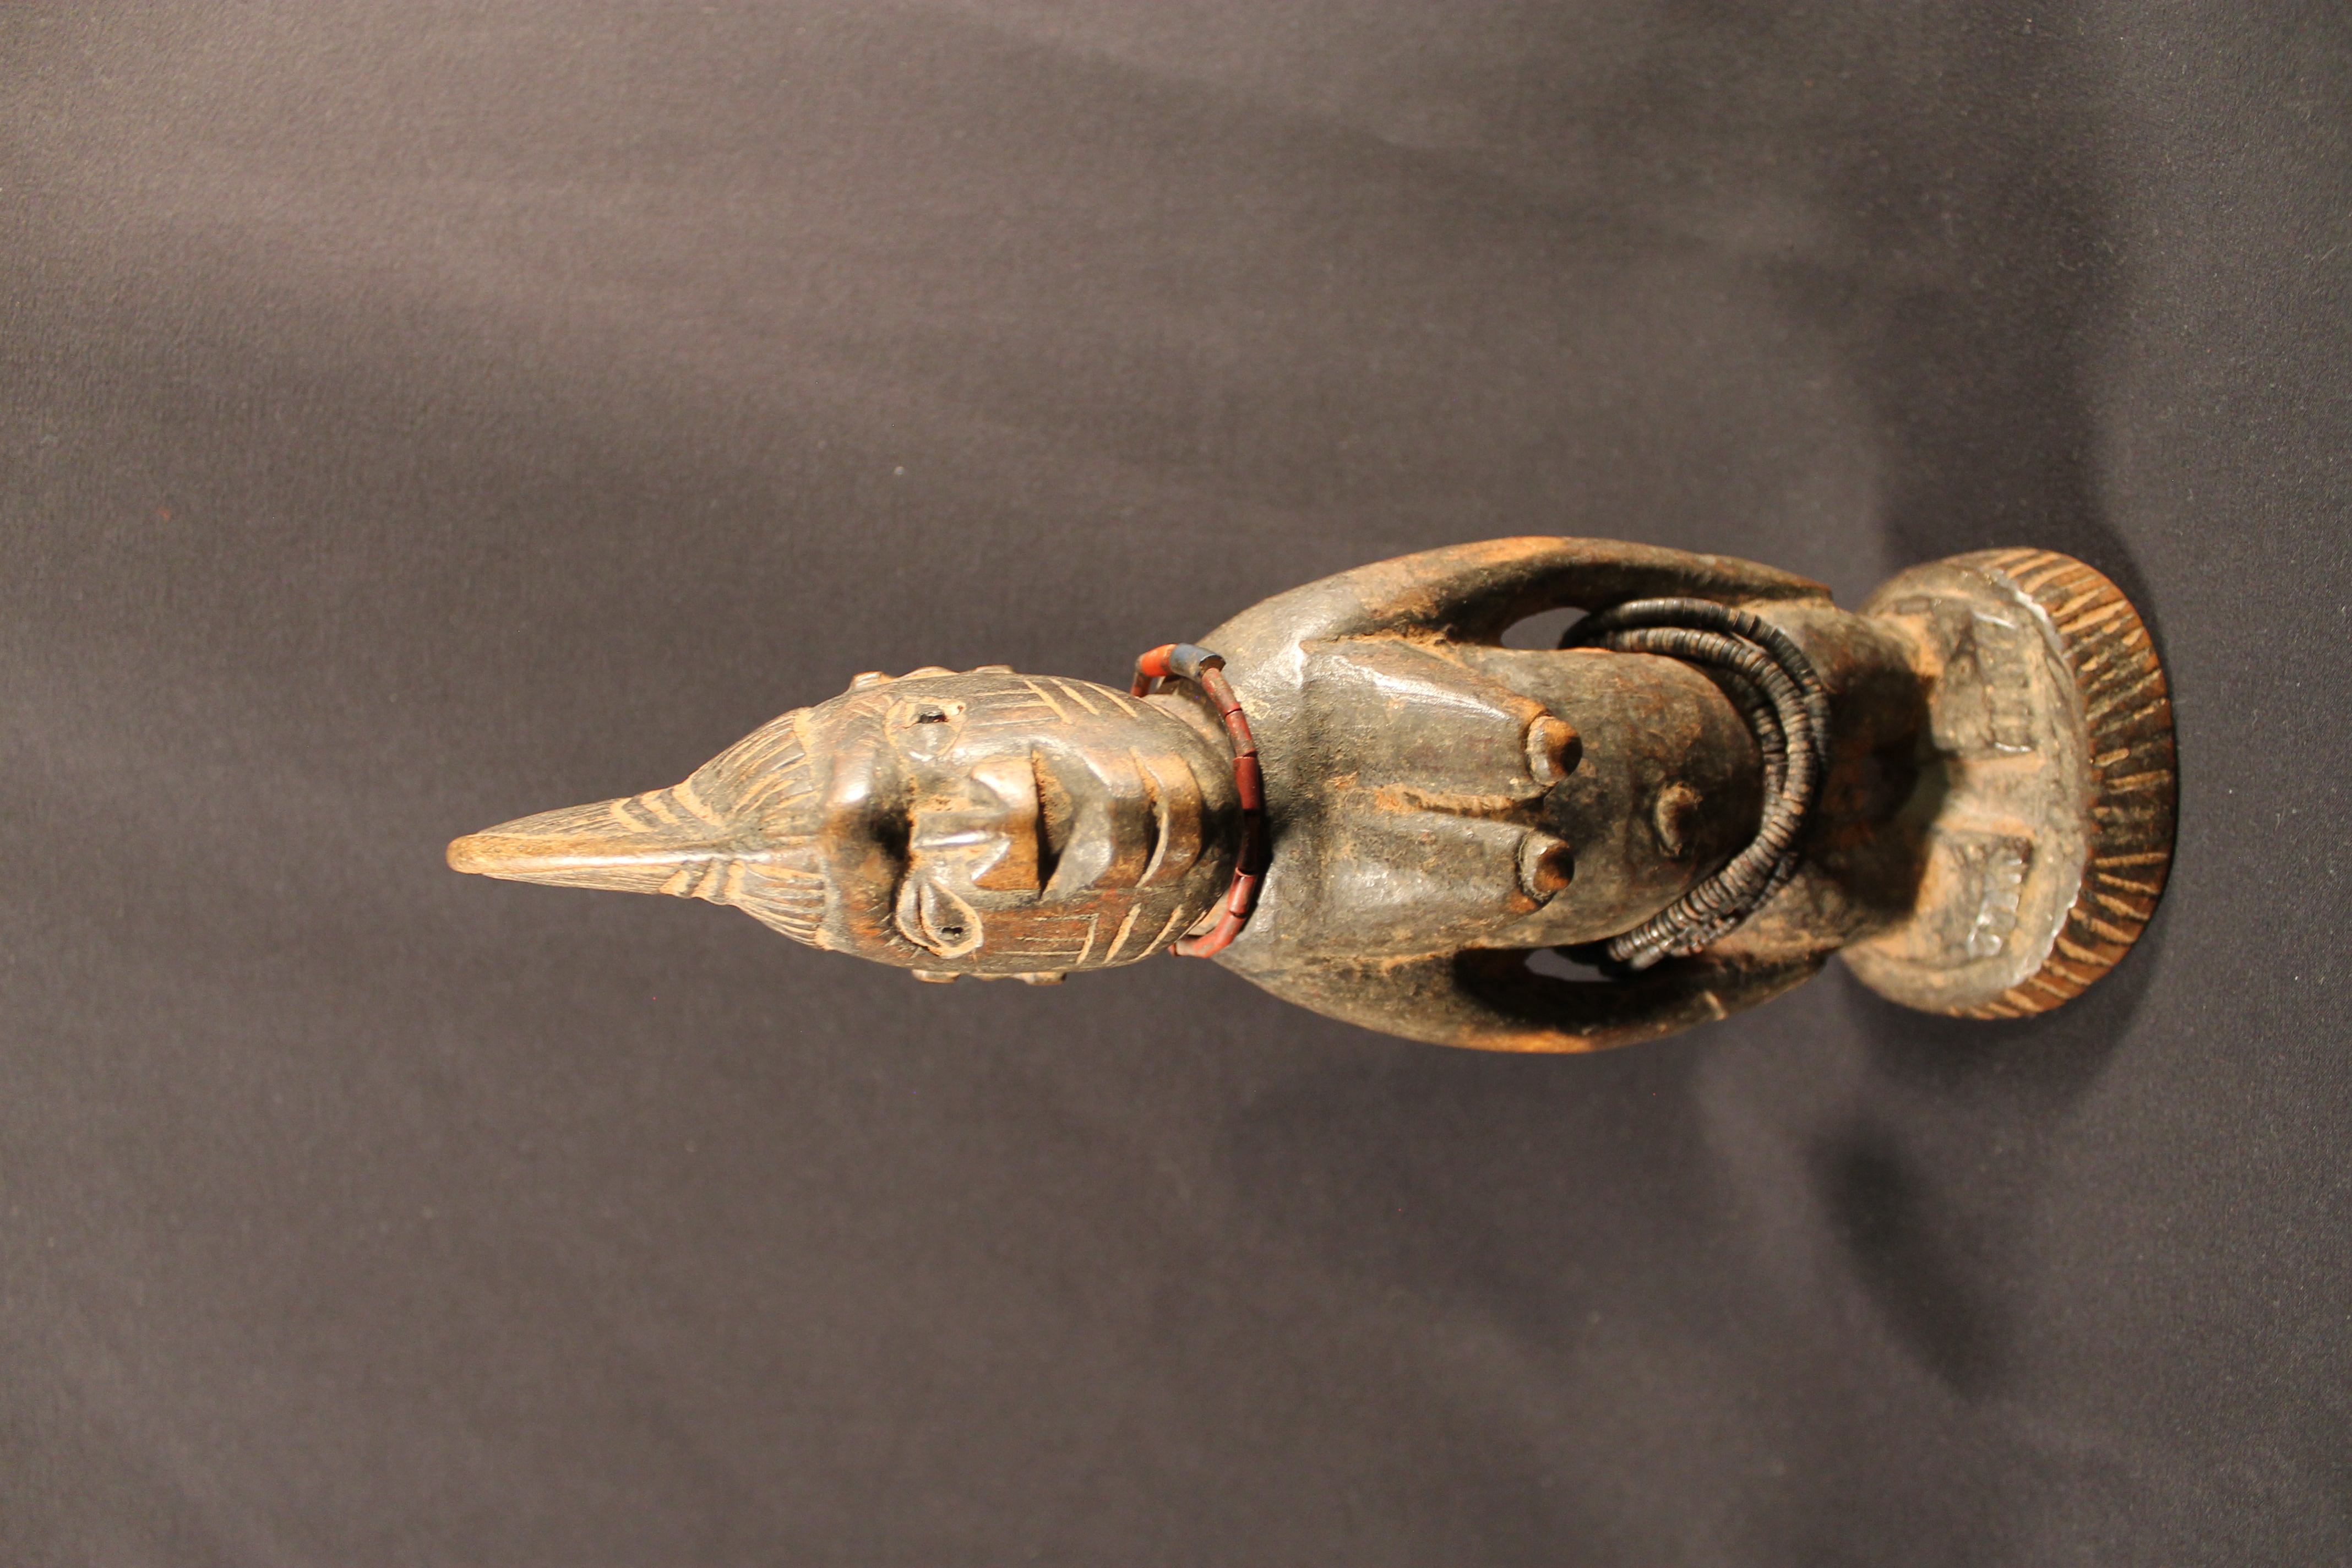 Female figure with crested coiffure, and black and red beads. Figure has evidence of offerings.  